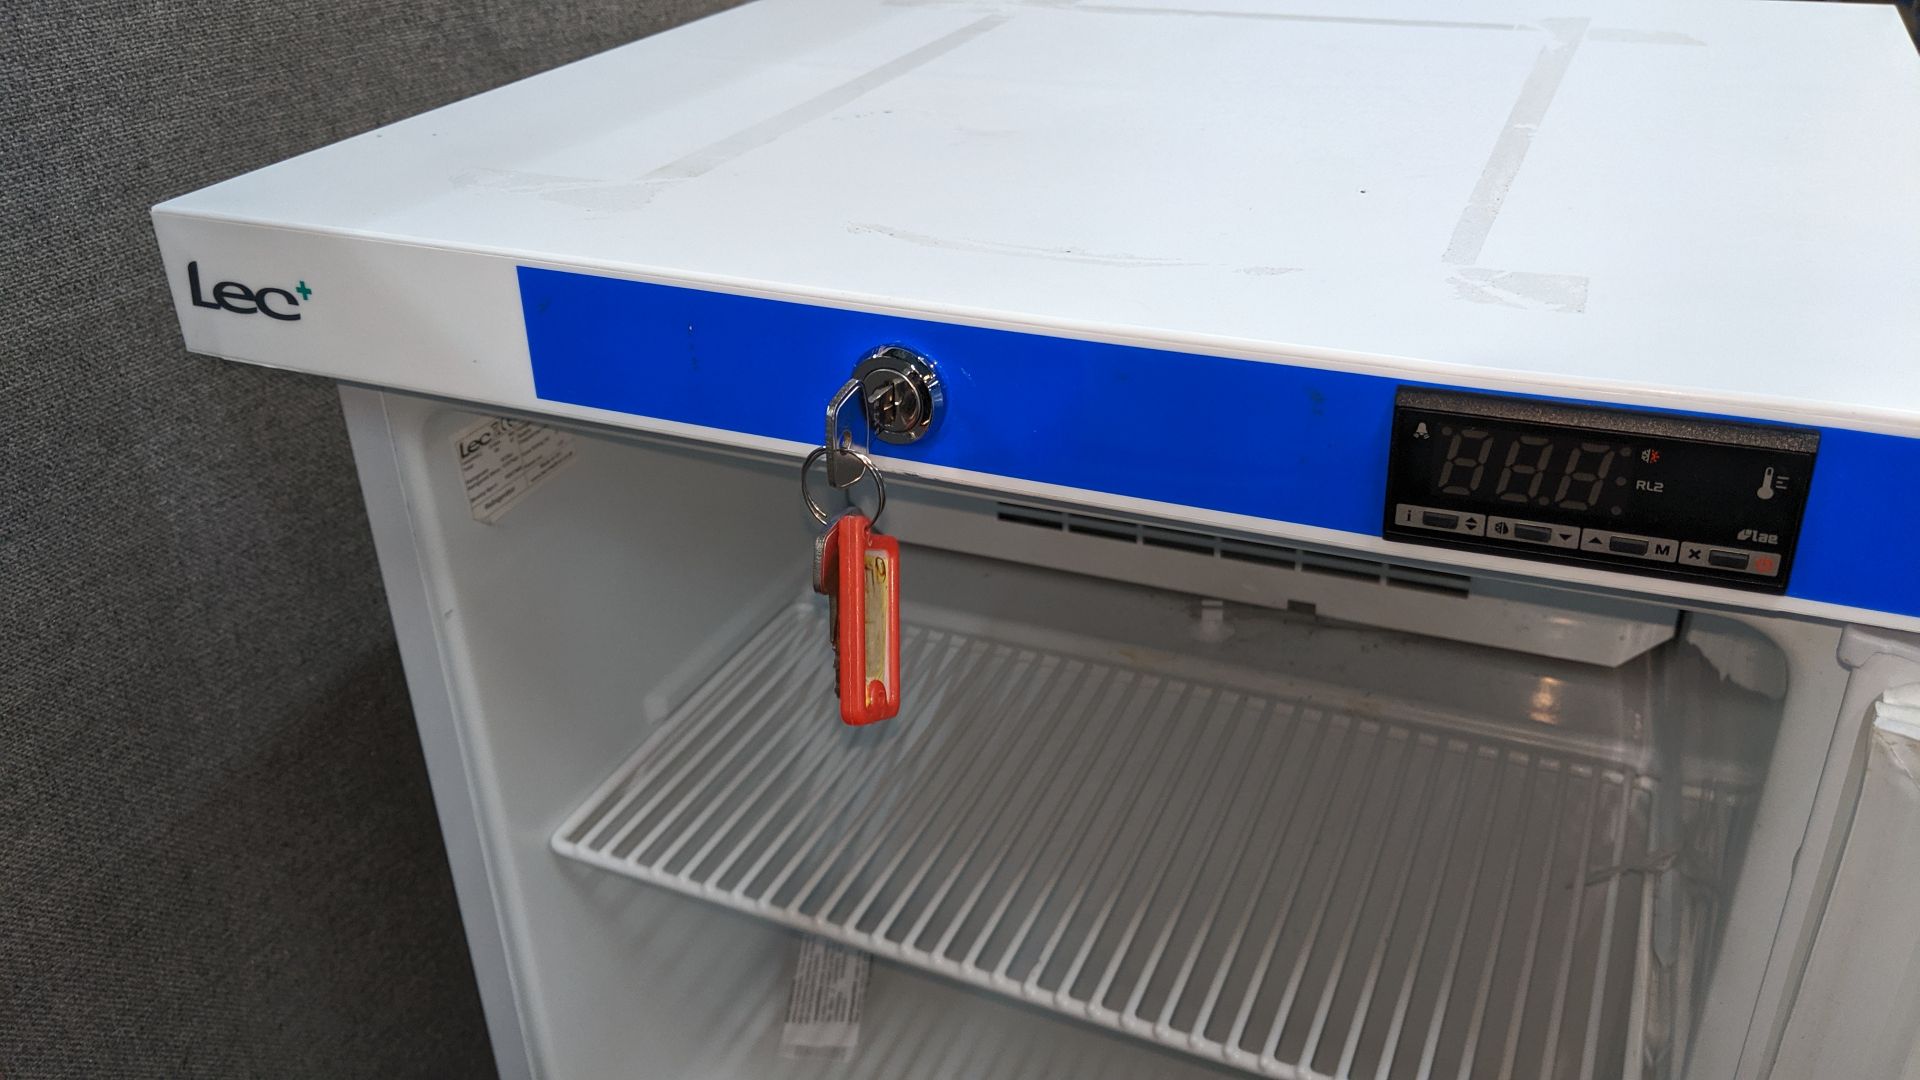 LEC lockable benchtop fridge with exterior digital display, model PE109, NO key. This is one of a - Image 5 of 5